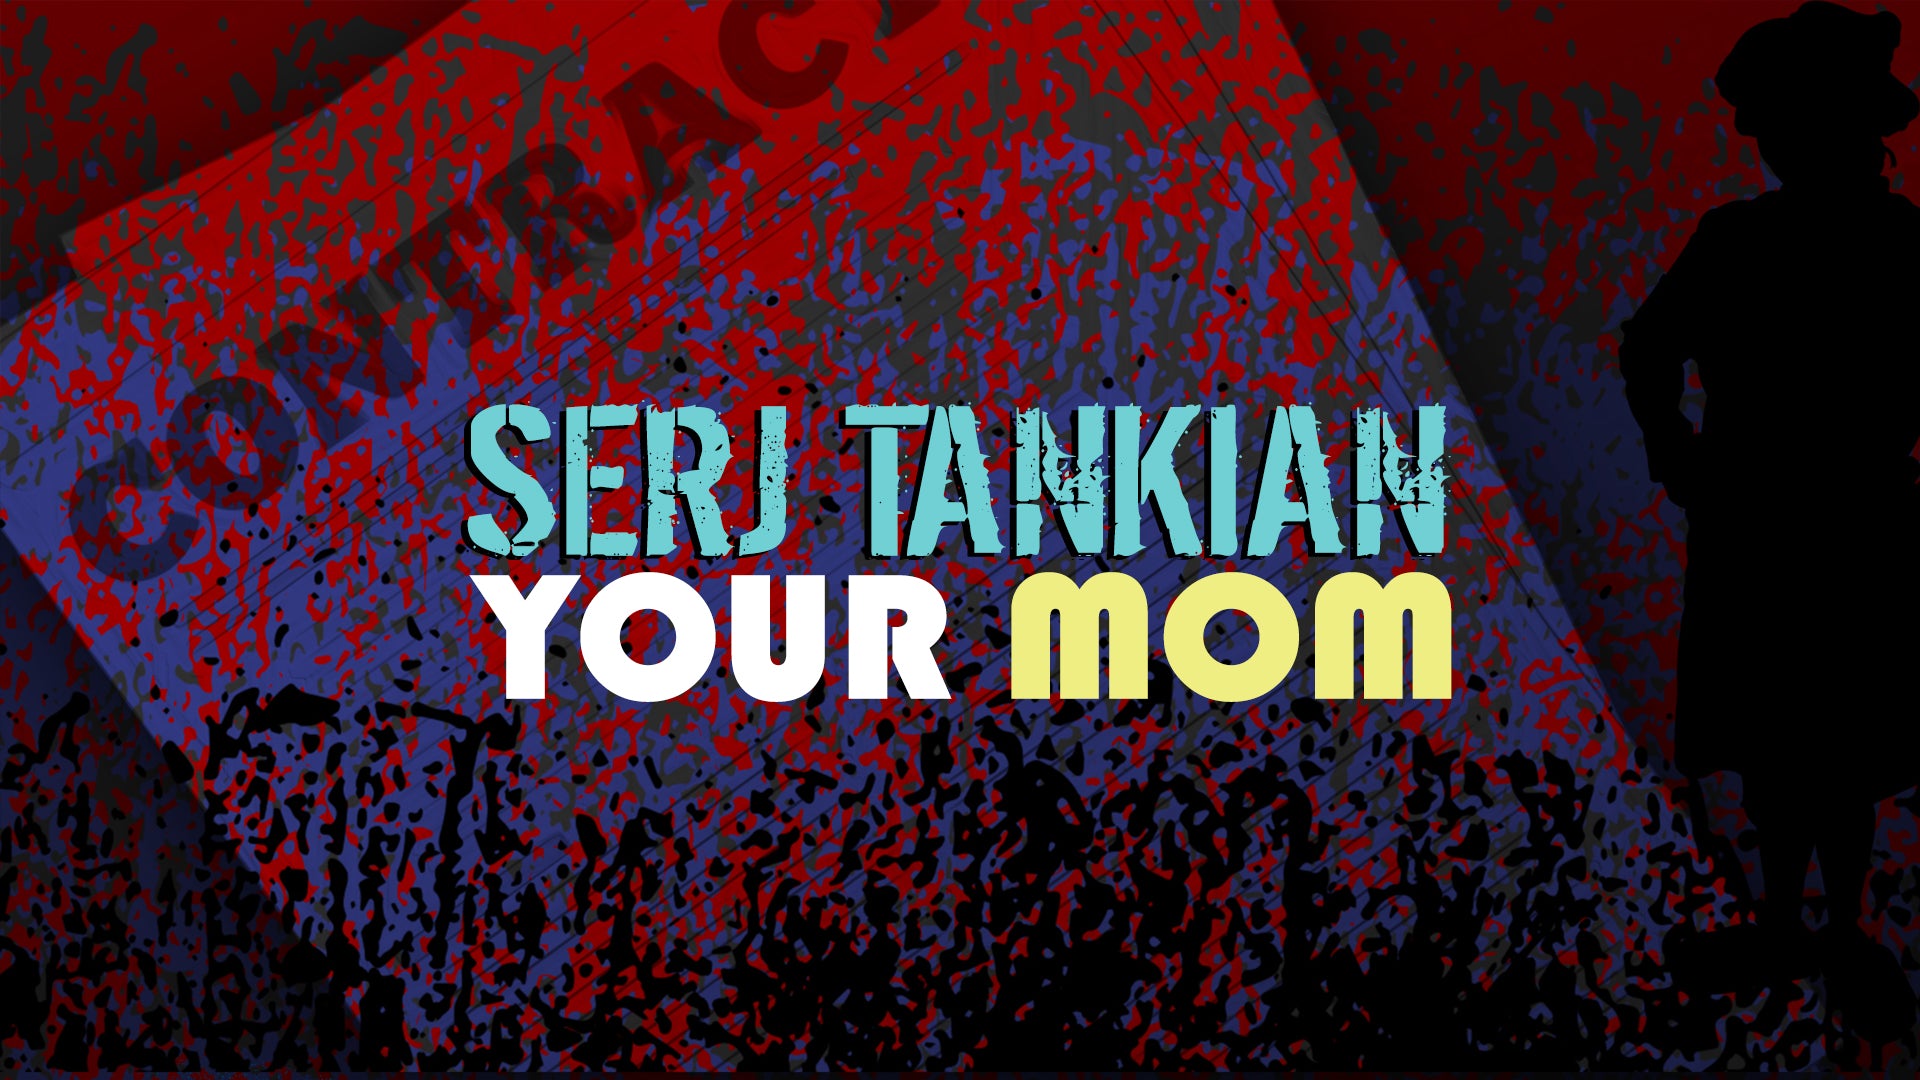 See Serj Tankian Compare Holy Wars to ‘Your Mom’ in New Lyric Video